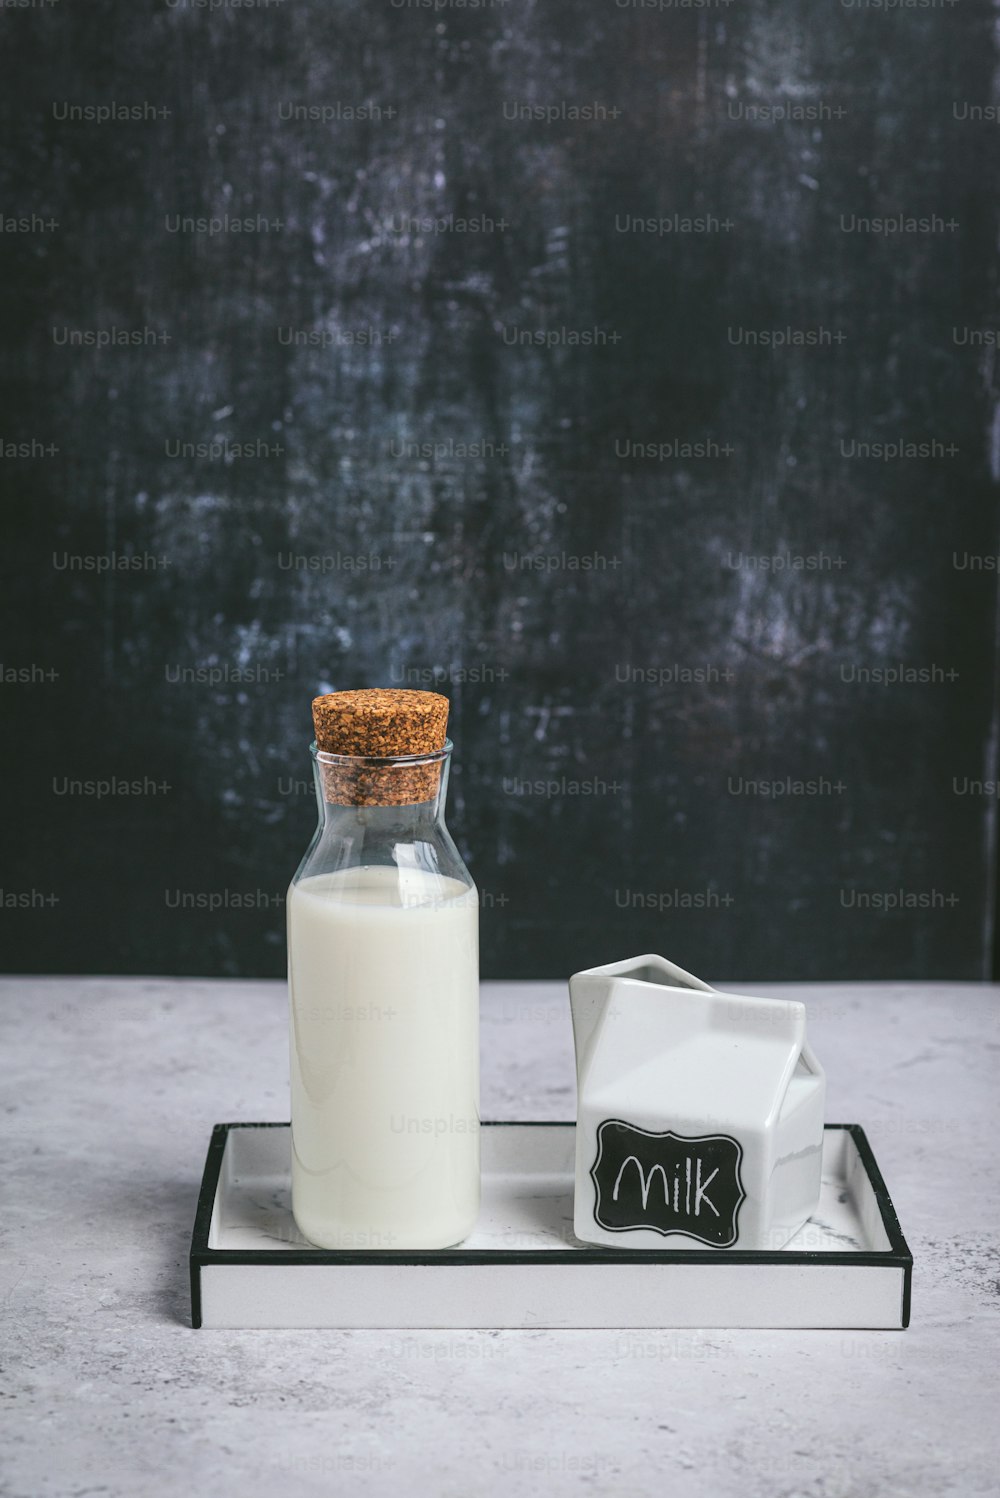 a bottle of milk and a glass of milk on a tray